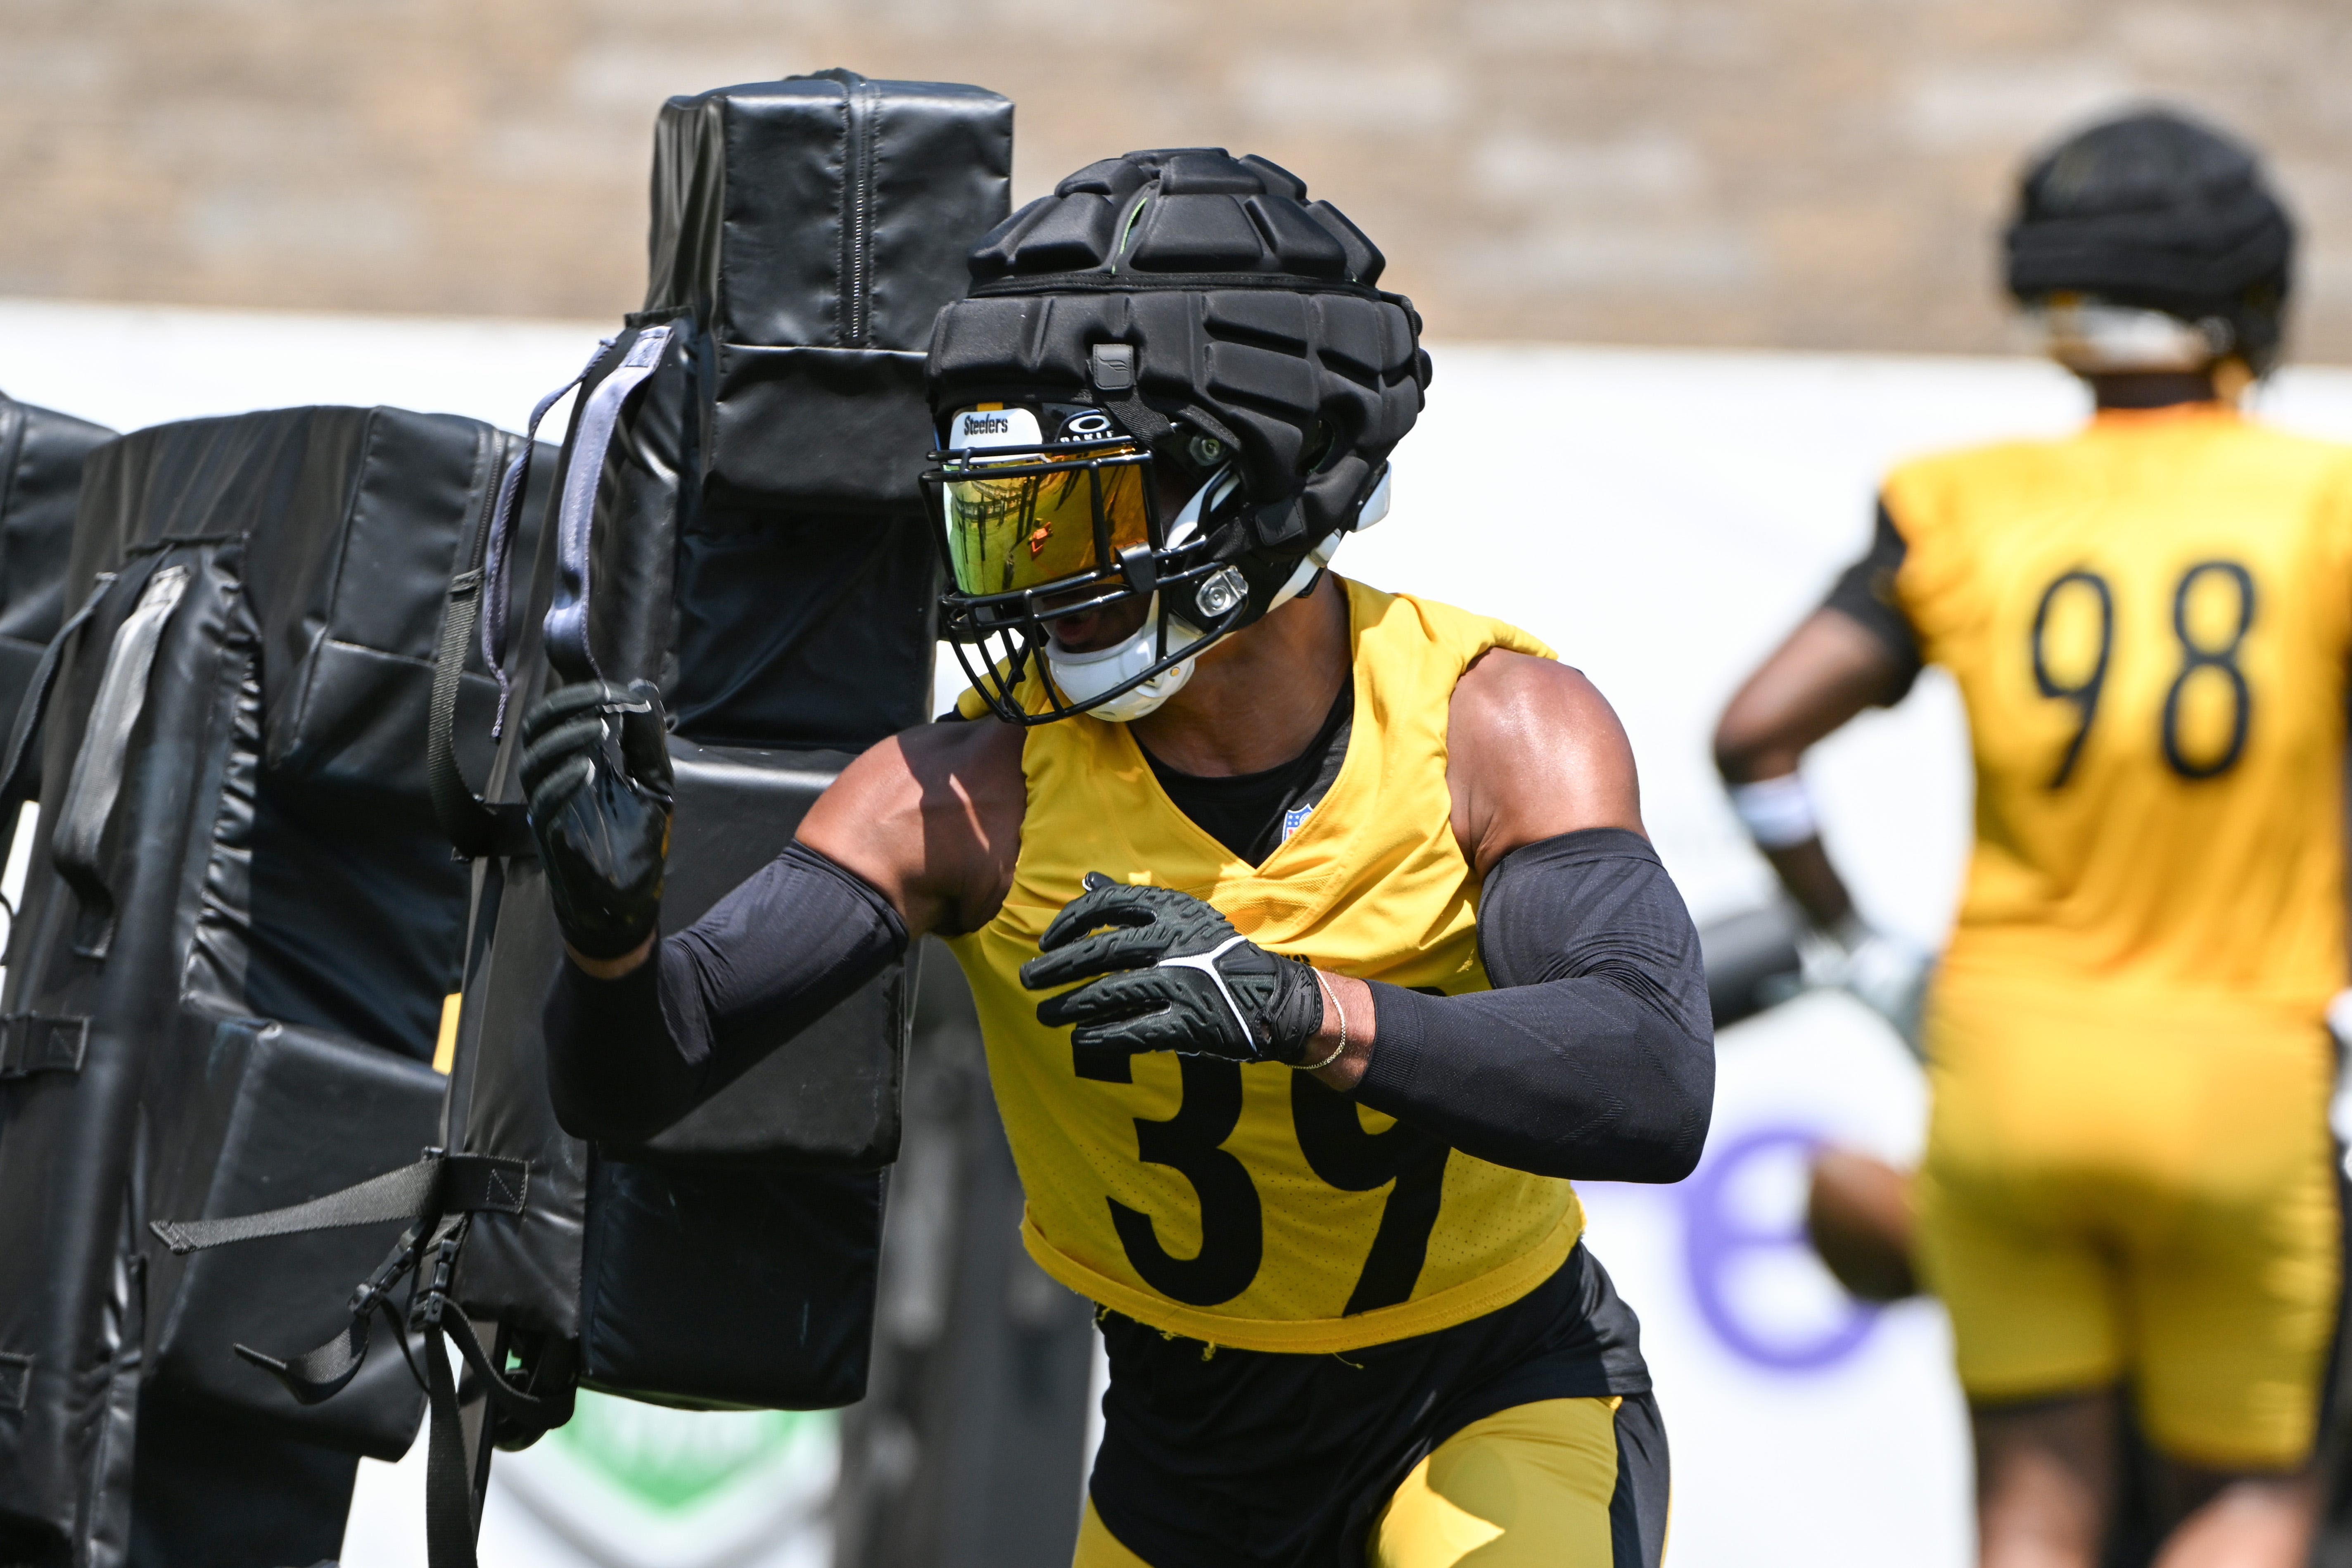 Steelers S Minkah Fitzpatrick on extra training camp rest: 'Just year 7, got a lot of miles'